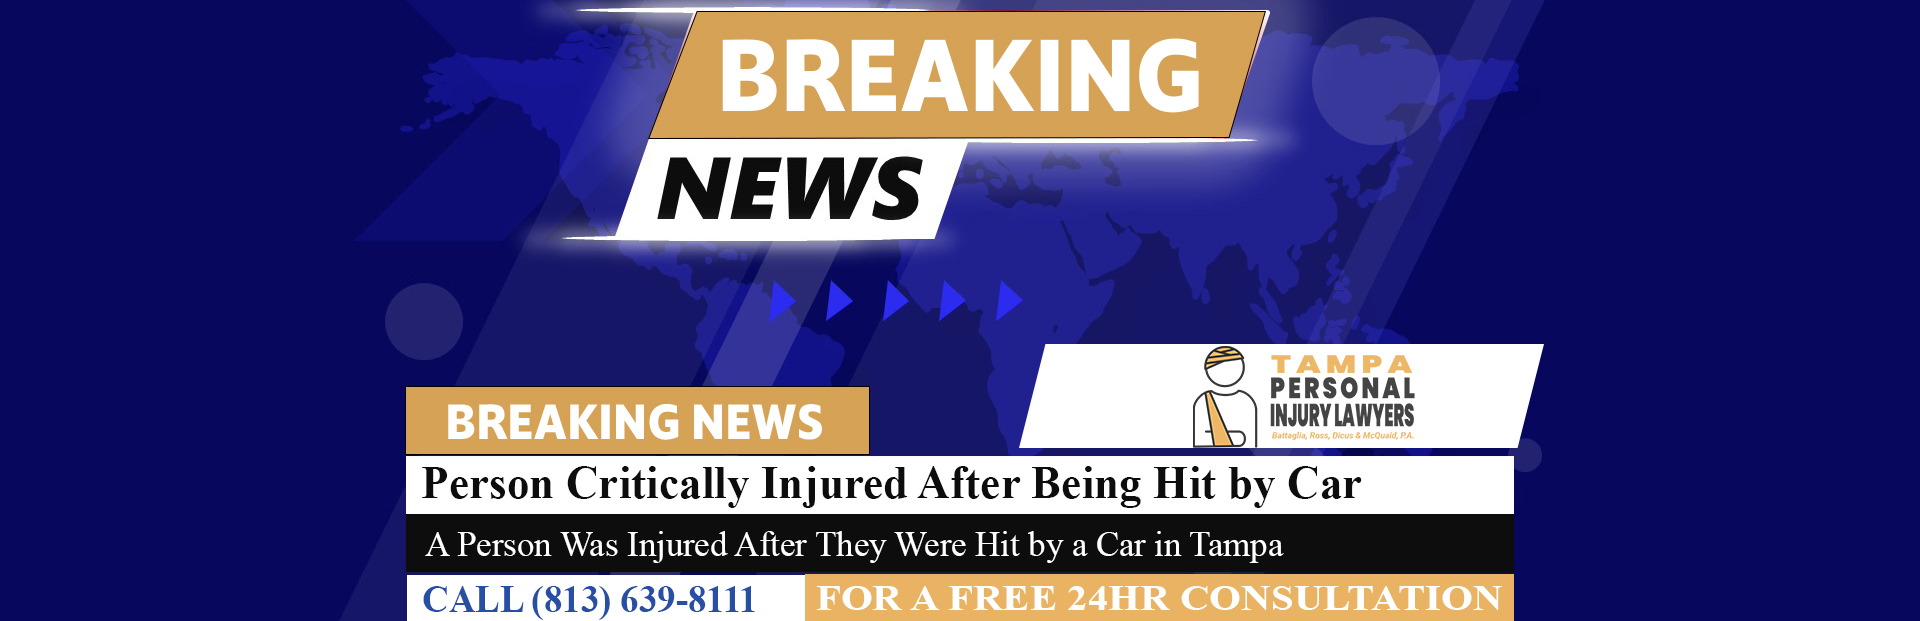 [06-10-24] Person Critically Injured After Being Hit by Car in Tampa